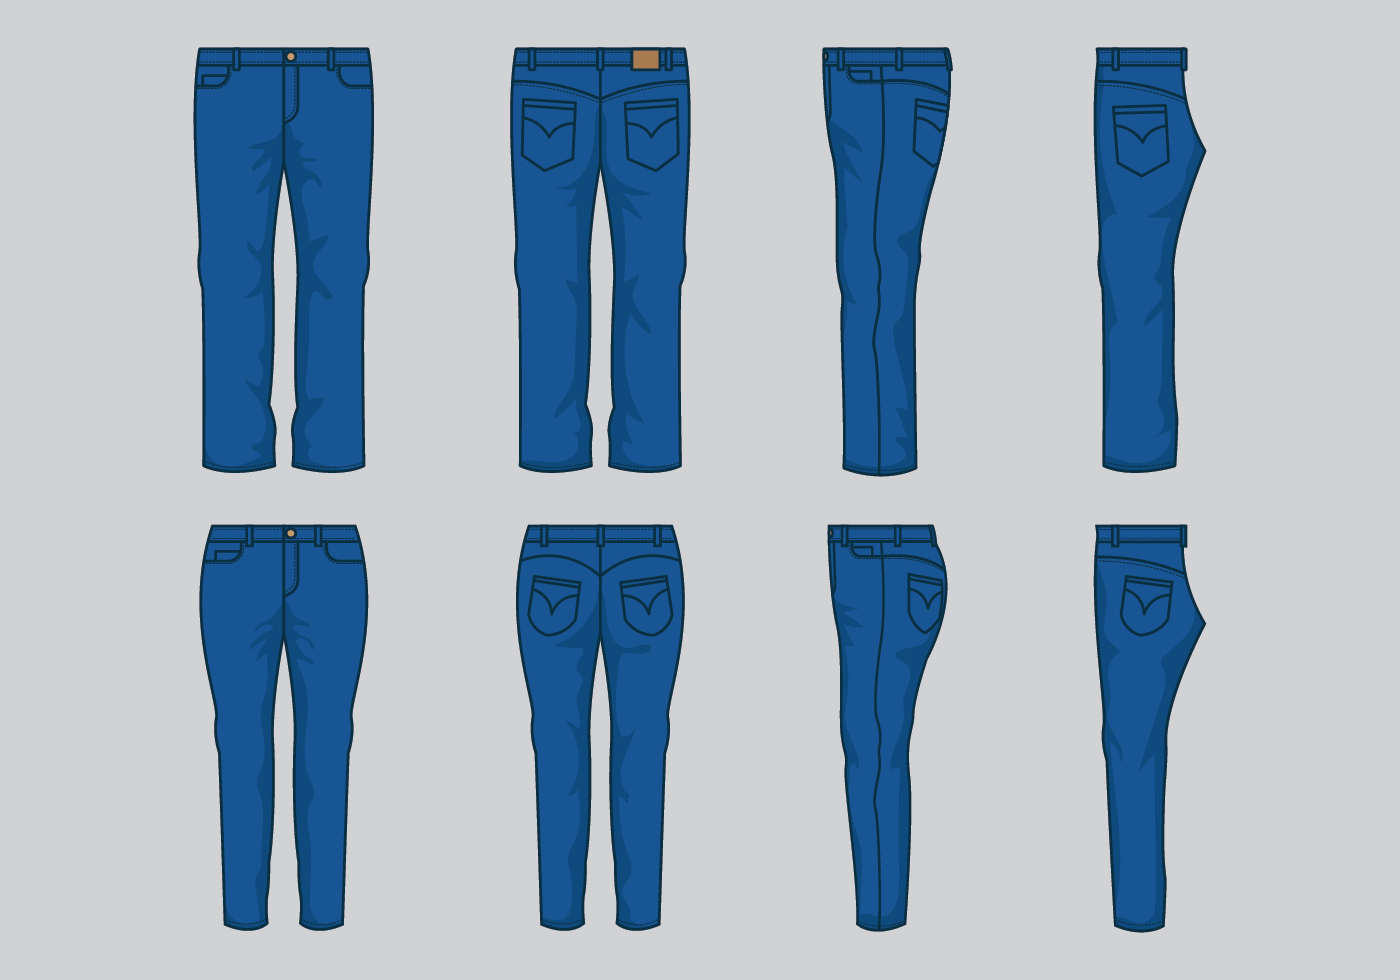 Jeans Free Vector Art - (1,581 Free Downloads)